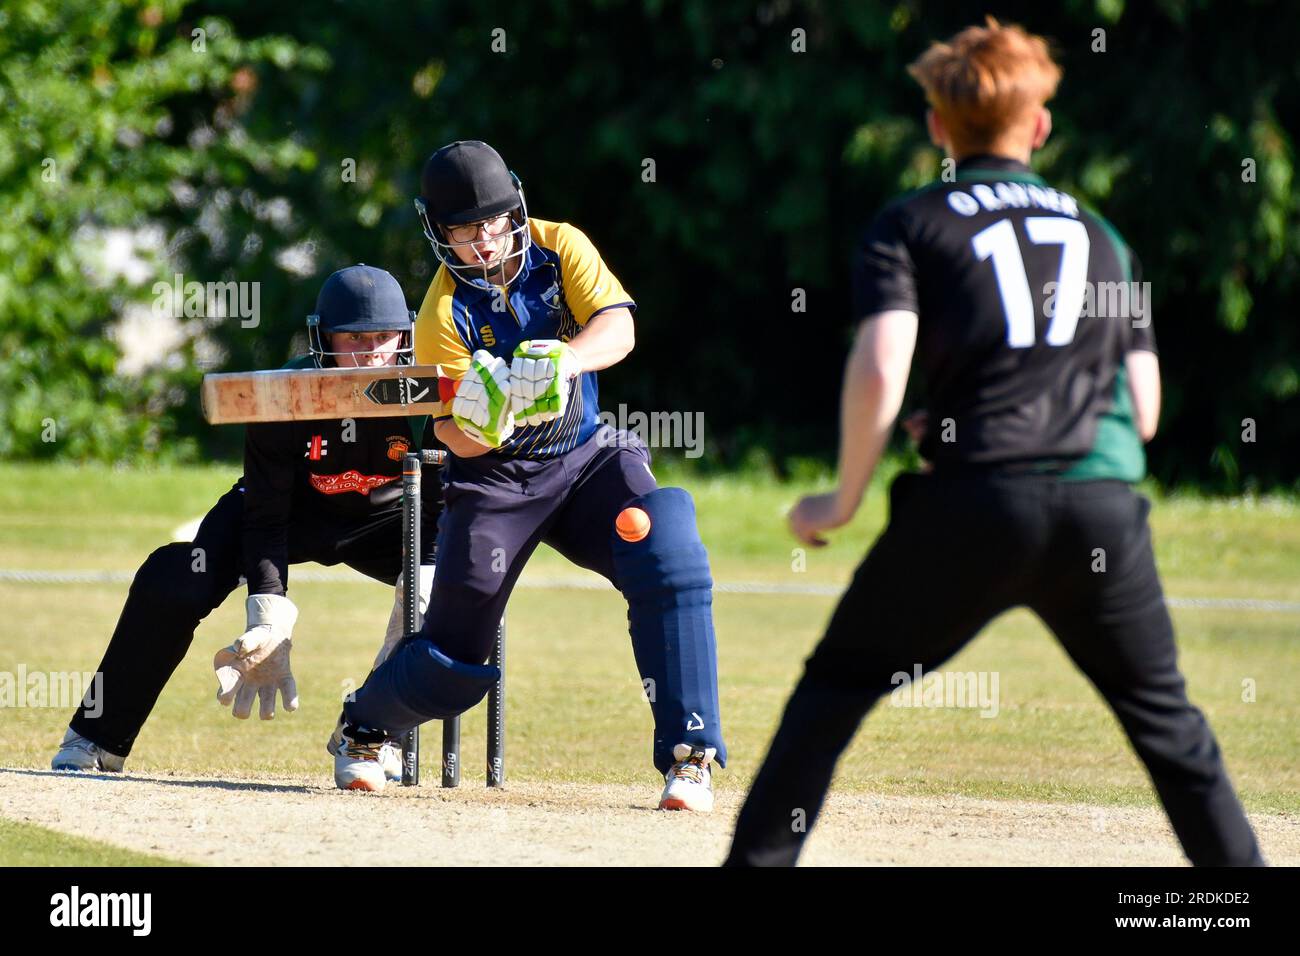 Clydach, Wales. 3 June 2023. A Clydach batsman during the South Wales Premier Cricket League Division Two match between Clydach and Chepstow at Waverley Park in Clydach, Wales, UK on 3 June 2023. Credit: Duncan Thomas/Majestic Media. Stock Photo